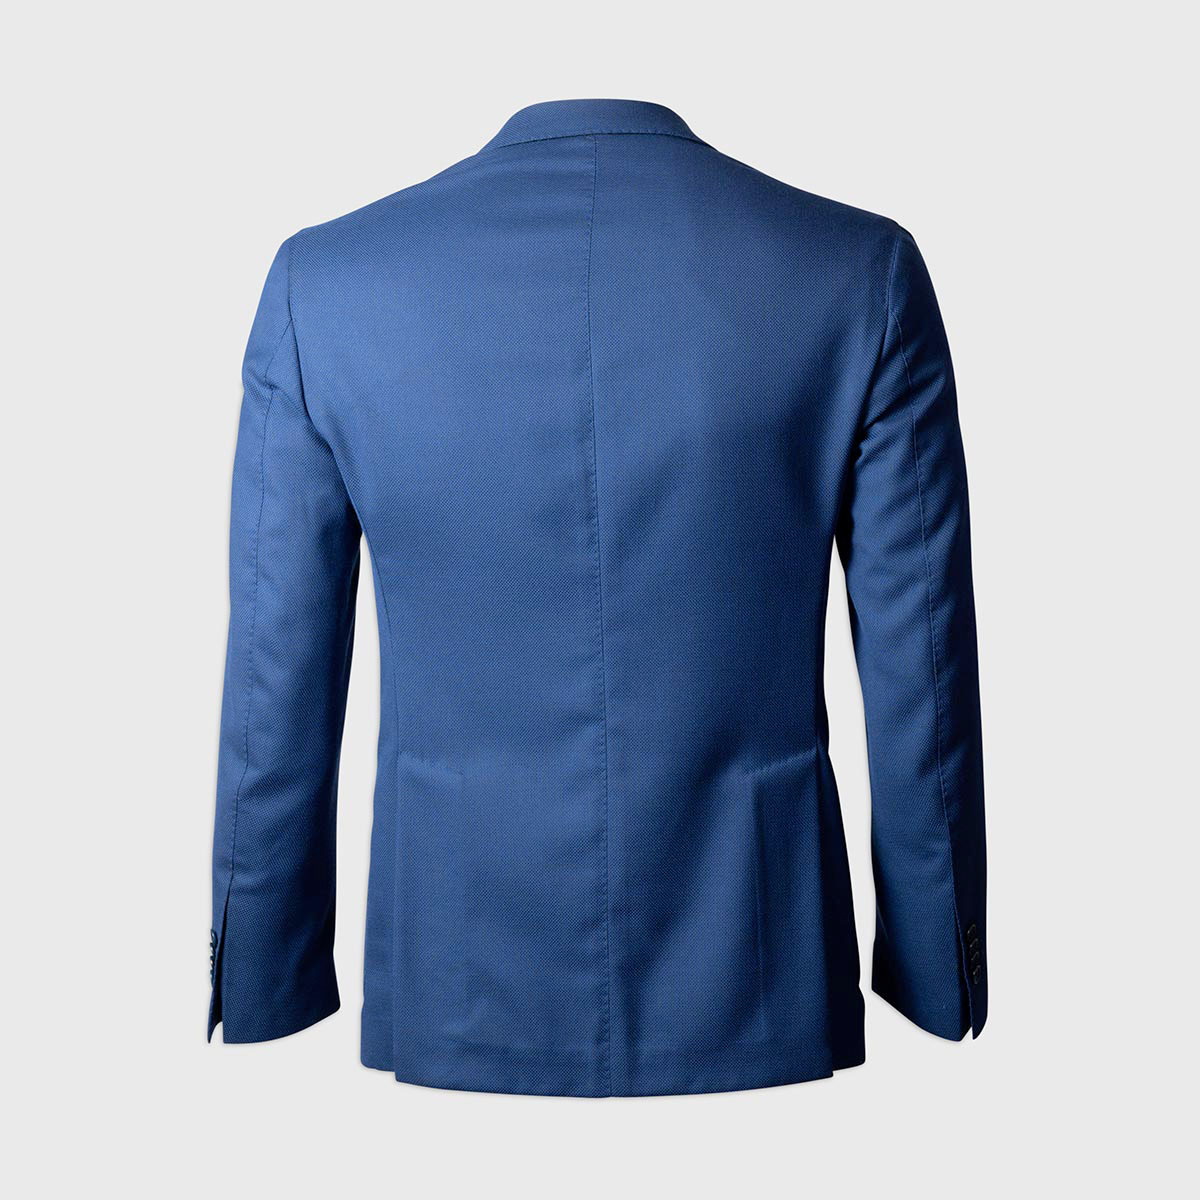 Half-lined Single-breasted jacket in Wool, Silk and Linen – Navy Melillo 1970 on sale 2022 2